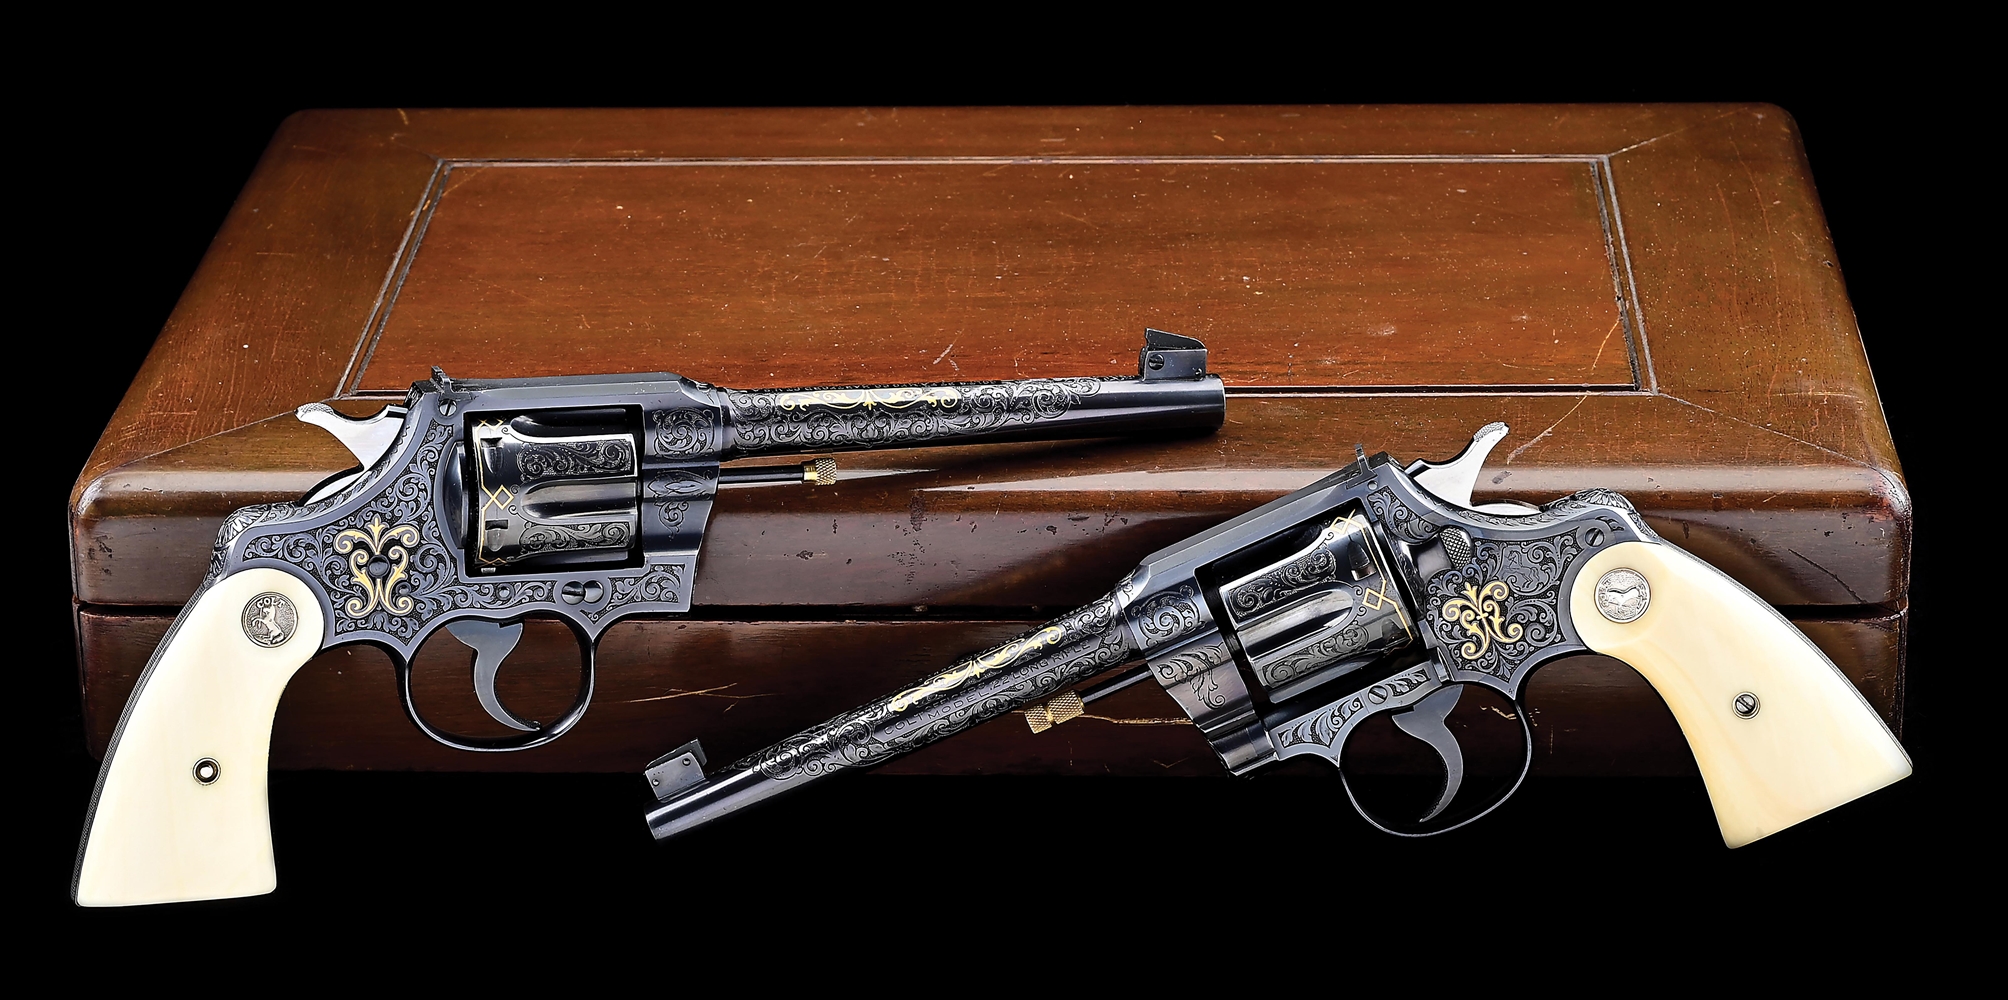 (C) PROFOUNDLY RARE PAIR OF EXHIBITION ENGRAVED & GOLD INLAID COLT OFFICERS MODEL DOUBLE ACTION REVOLVERS WITH DELUXE FRENCH STYLE CASE & FACTORY LETTERS, IN MAGNIFICENT CONDITION.